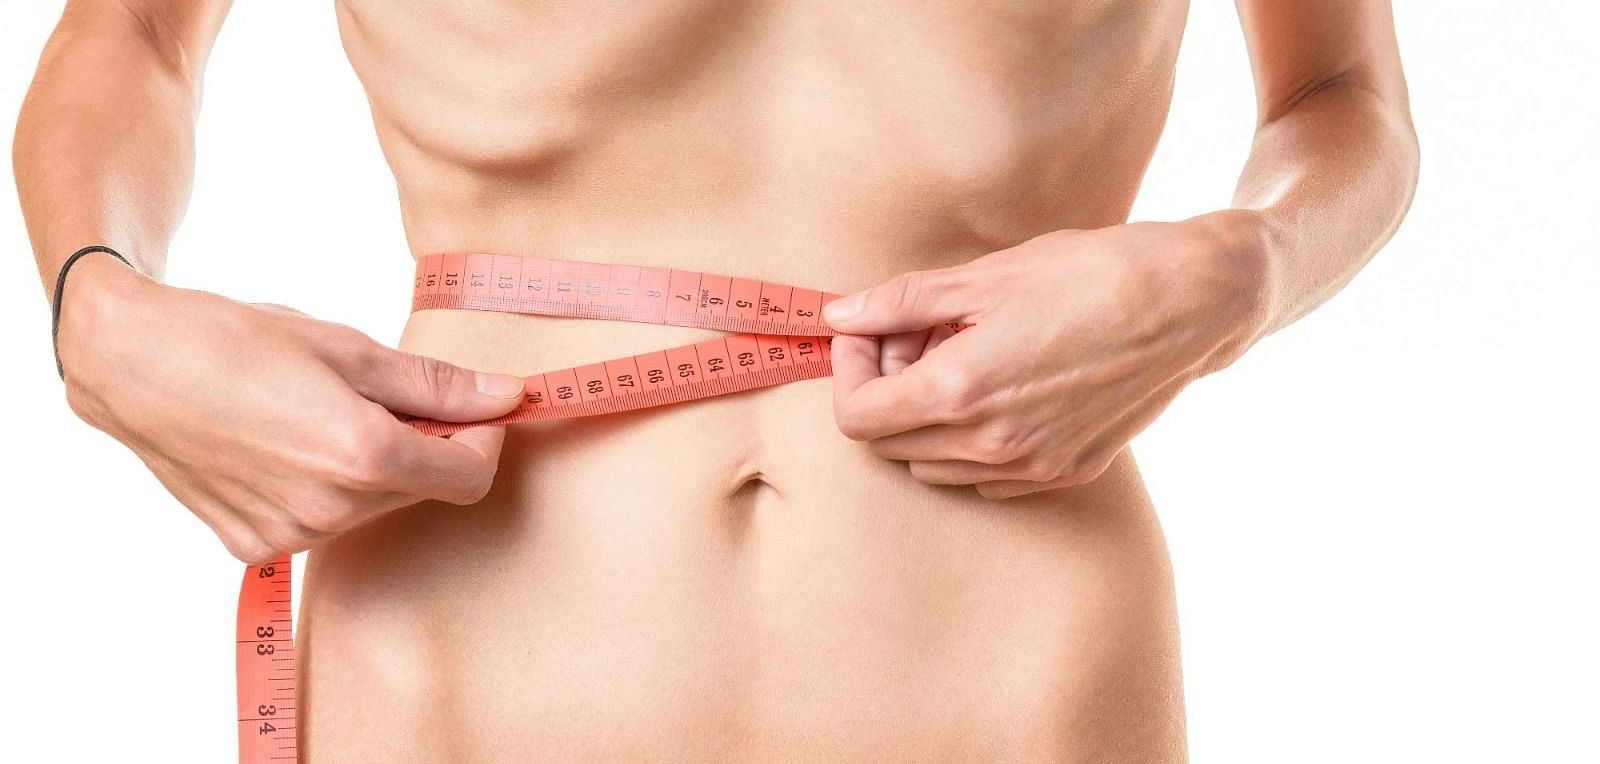 Underweight (Image via Getty Images)